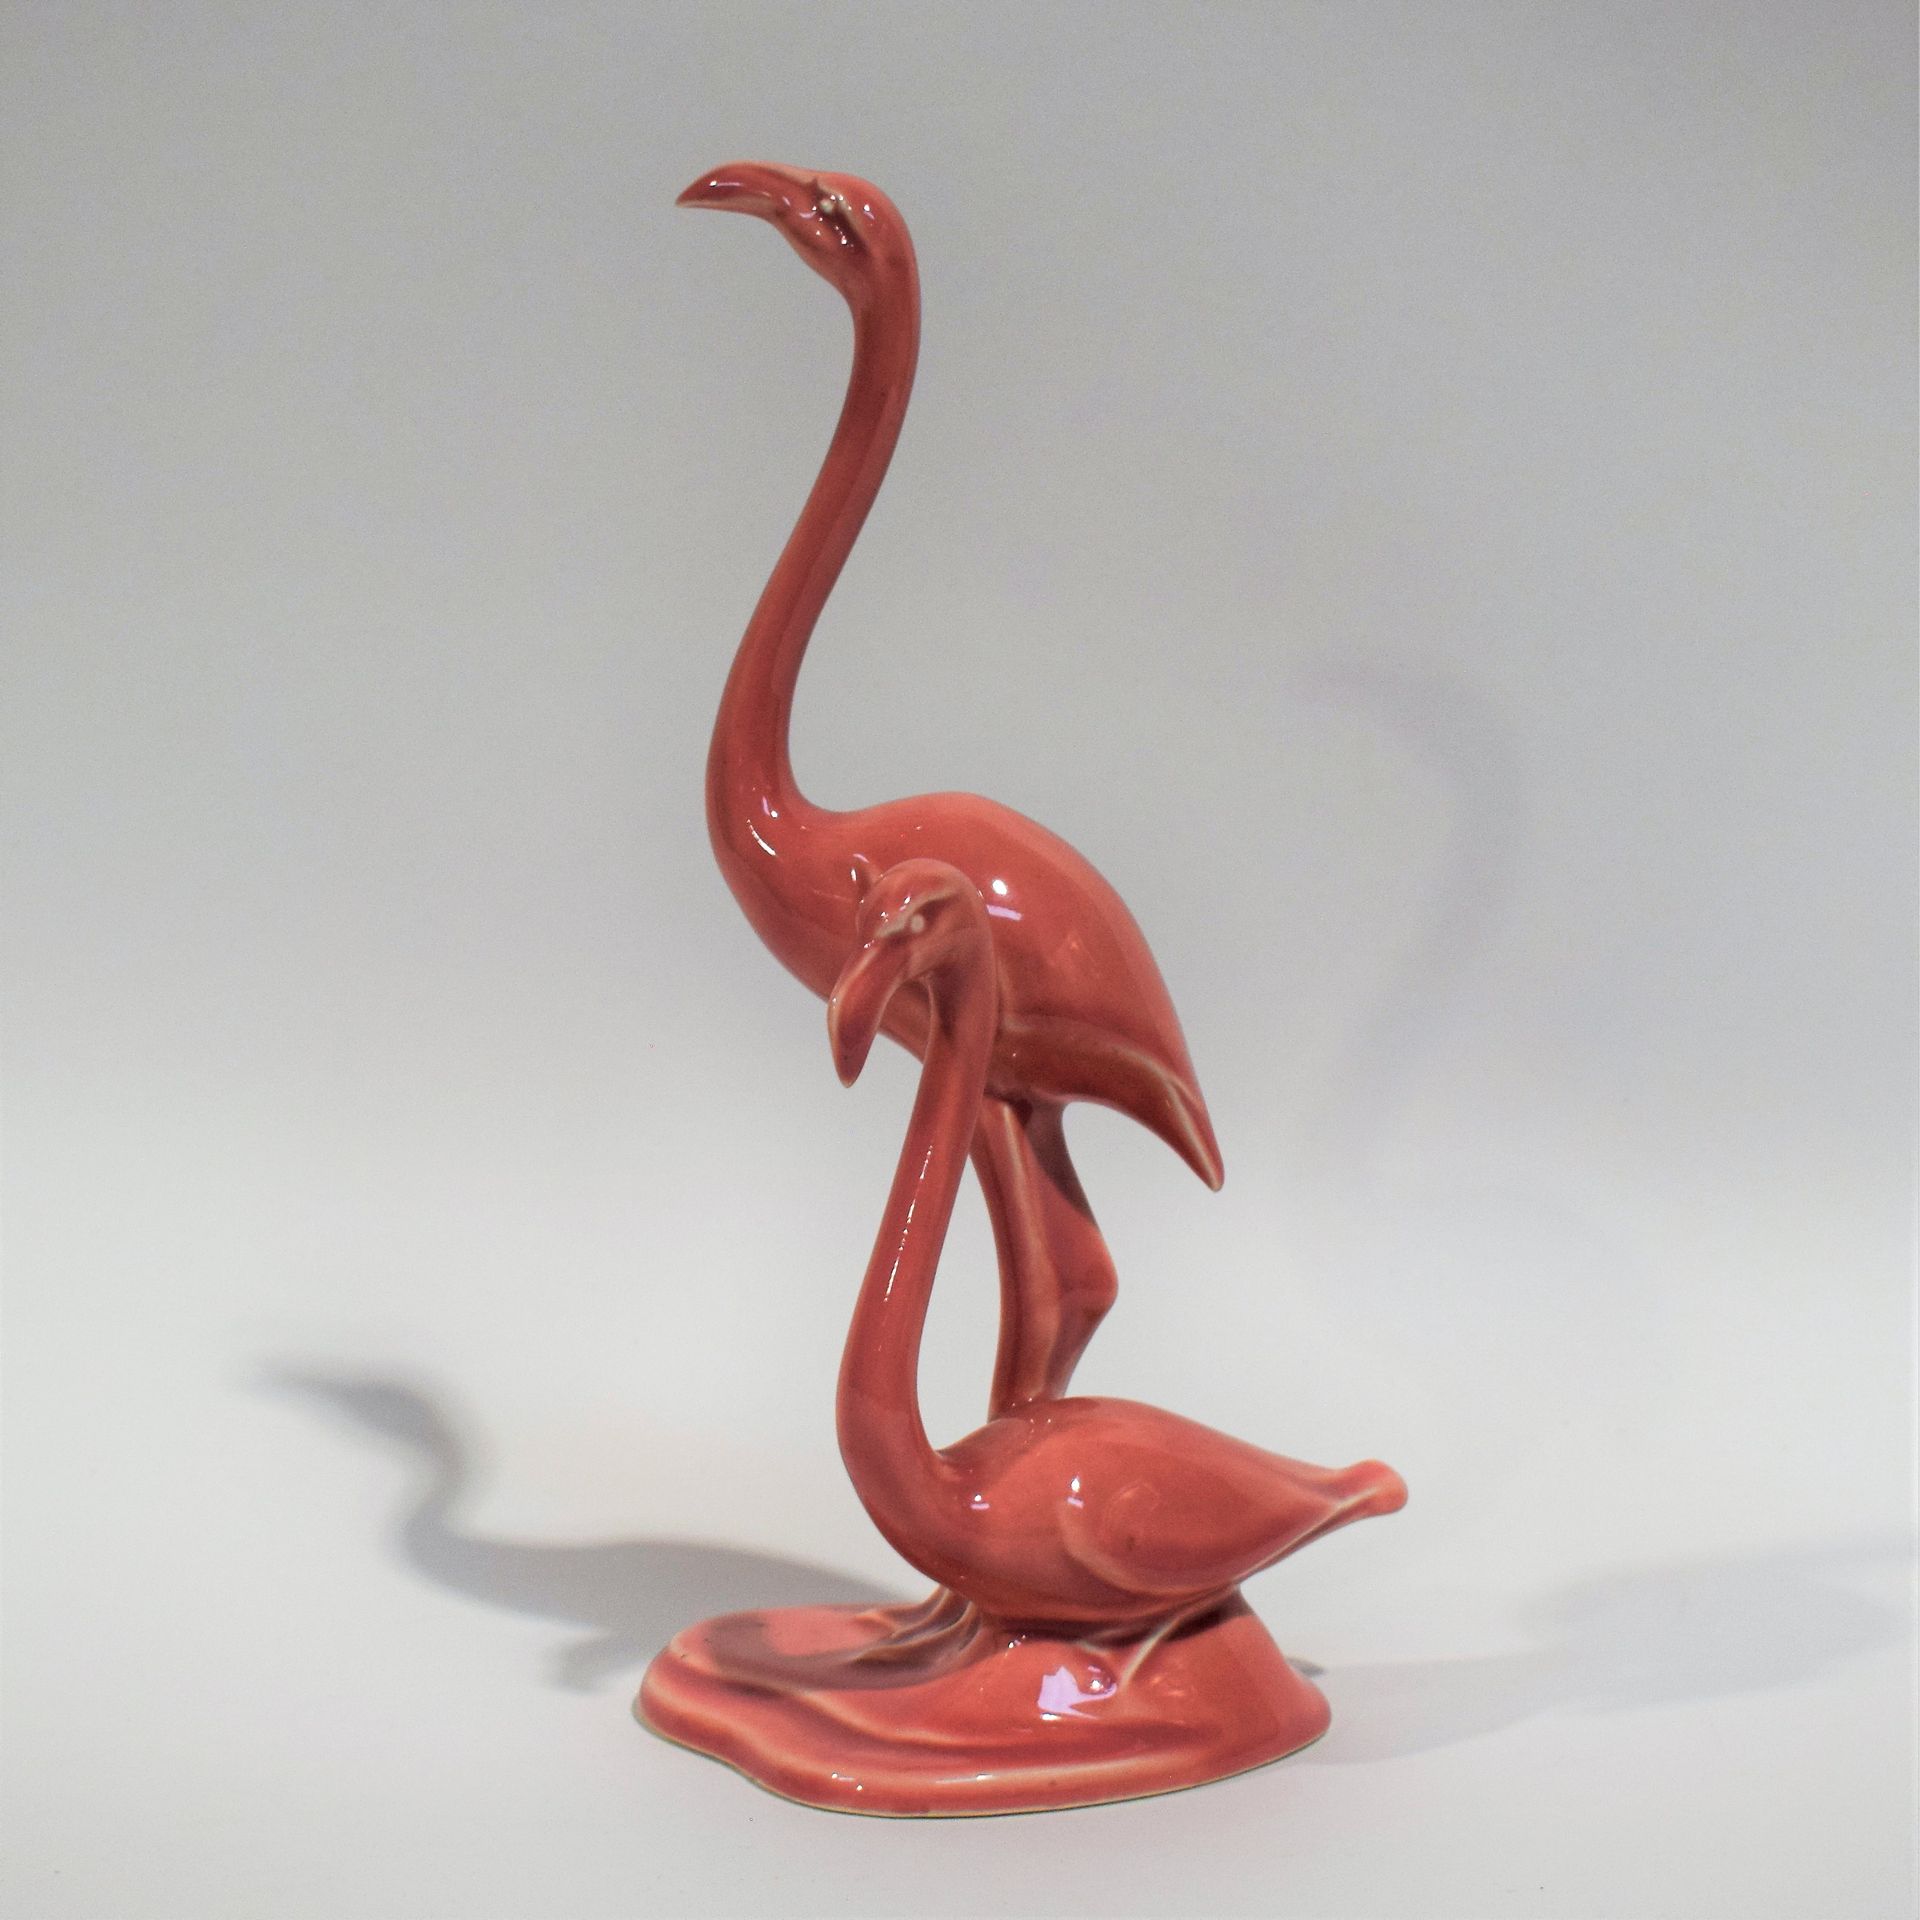 Null (VILLEROY BOCH) Rare pair of pink flamingos in VILLEROY BOCH Luxembourg gla&hellip;